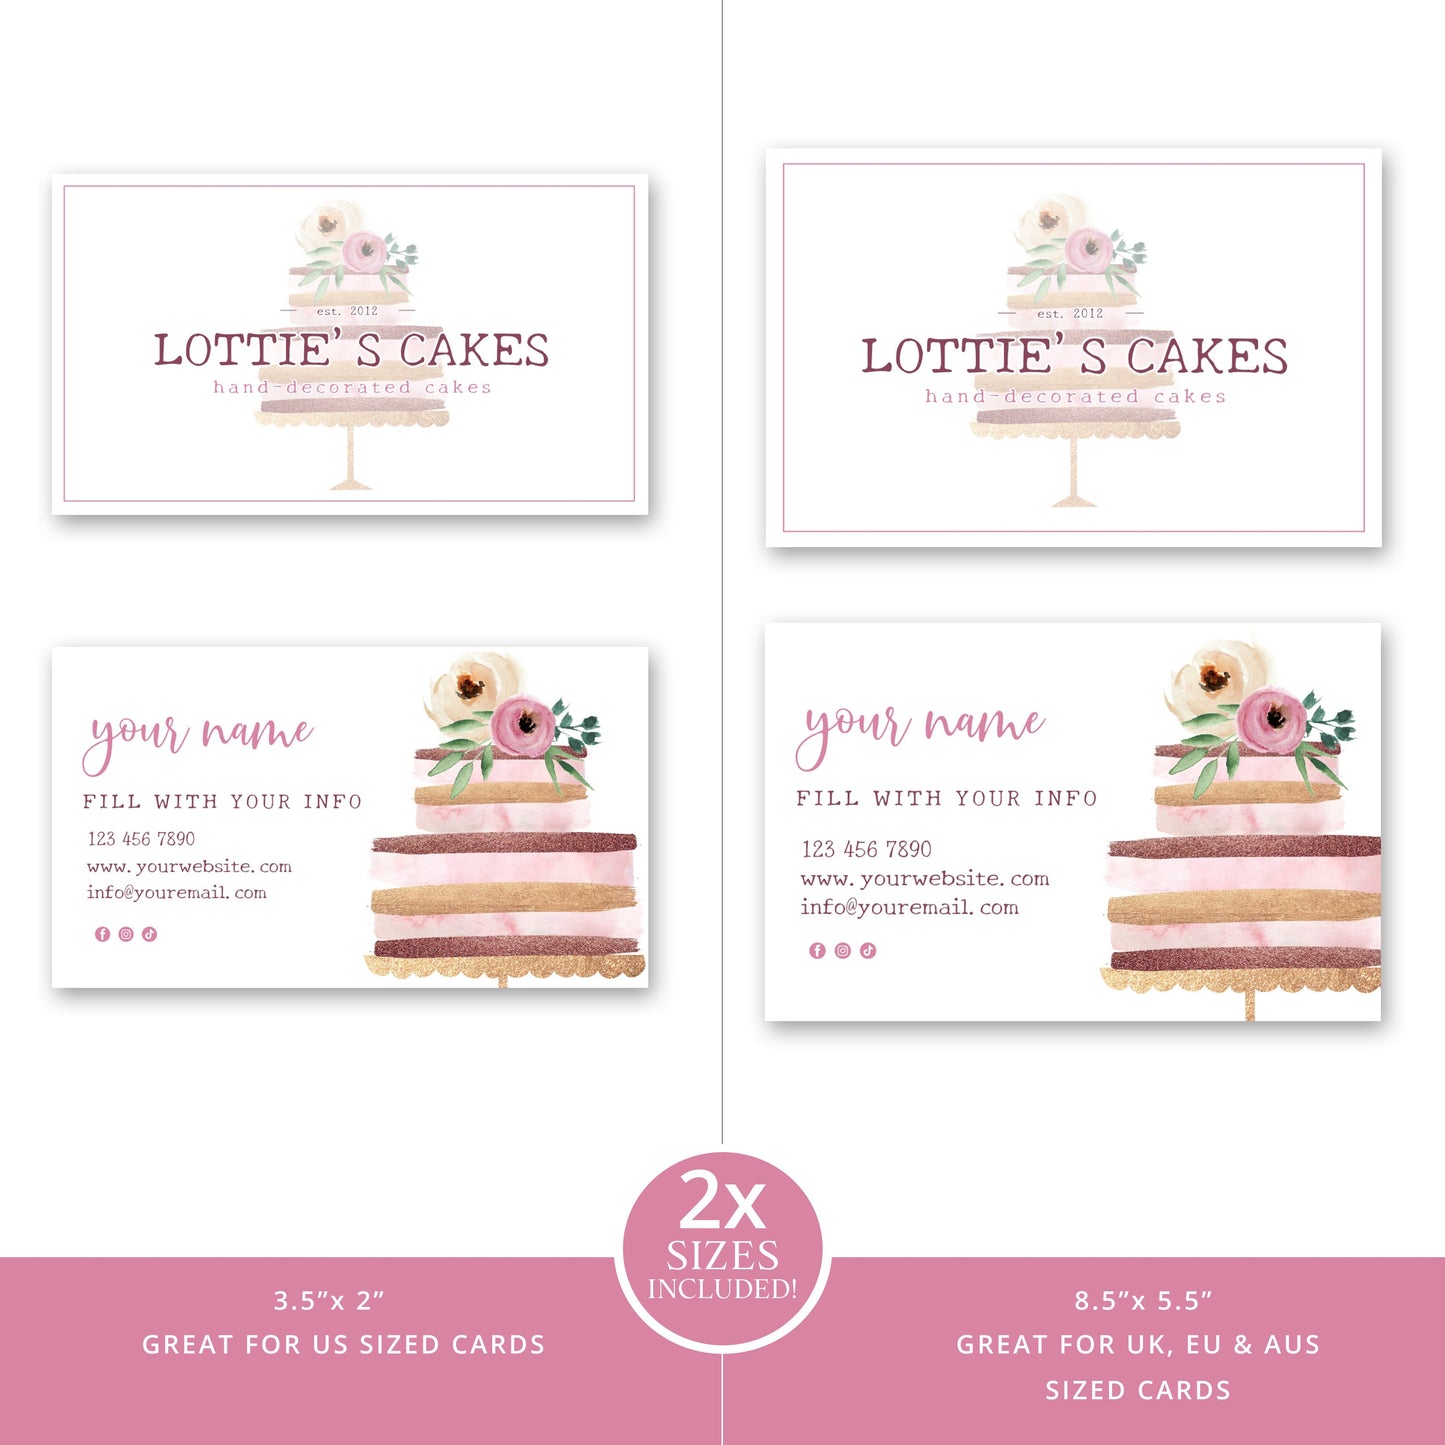 Editable Bakery Branding Bundle, 4pc Cute Cake Logo Kit and Business Card Template, DIY Edit Company Brand Set, Instant Download LC-001